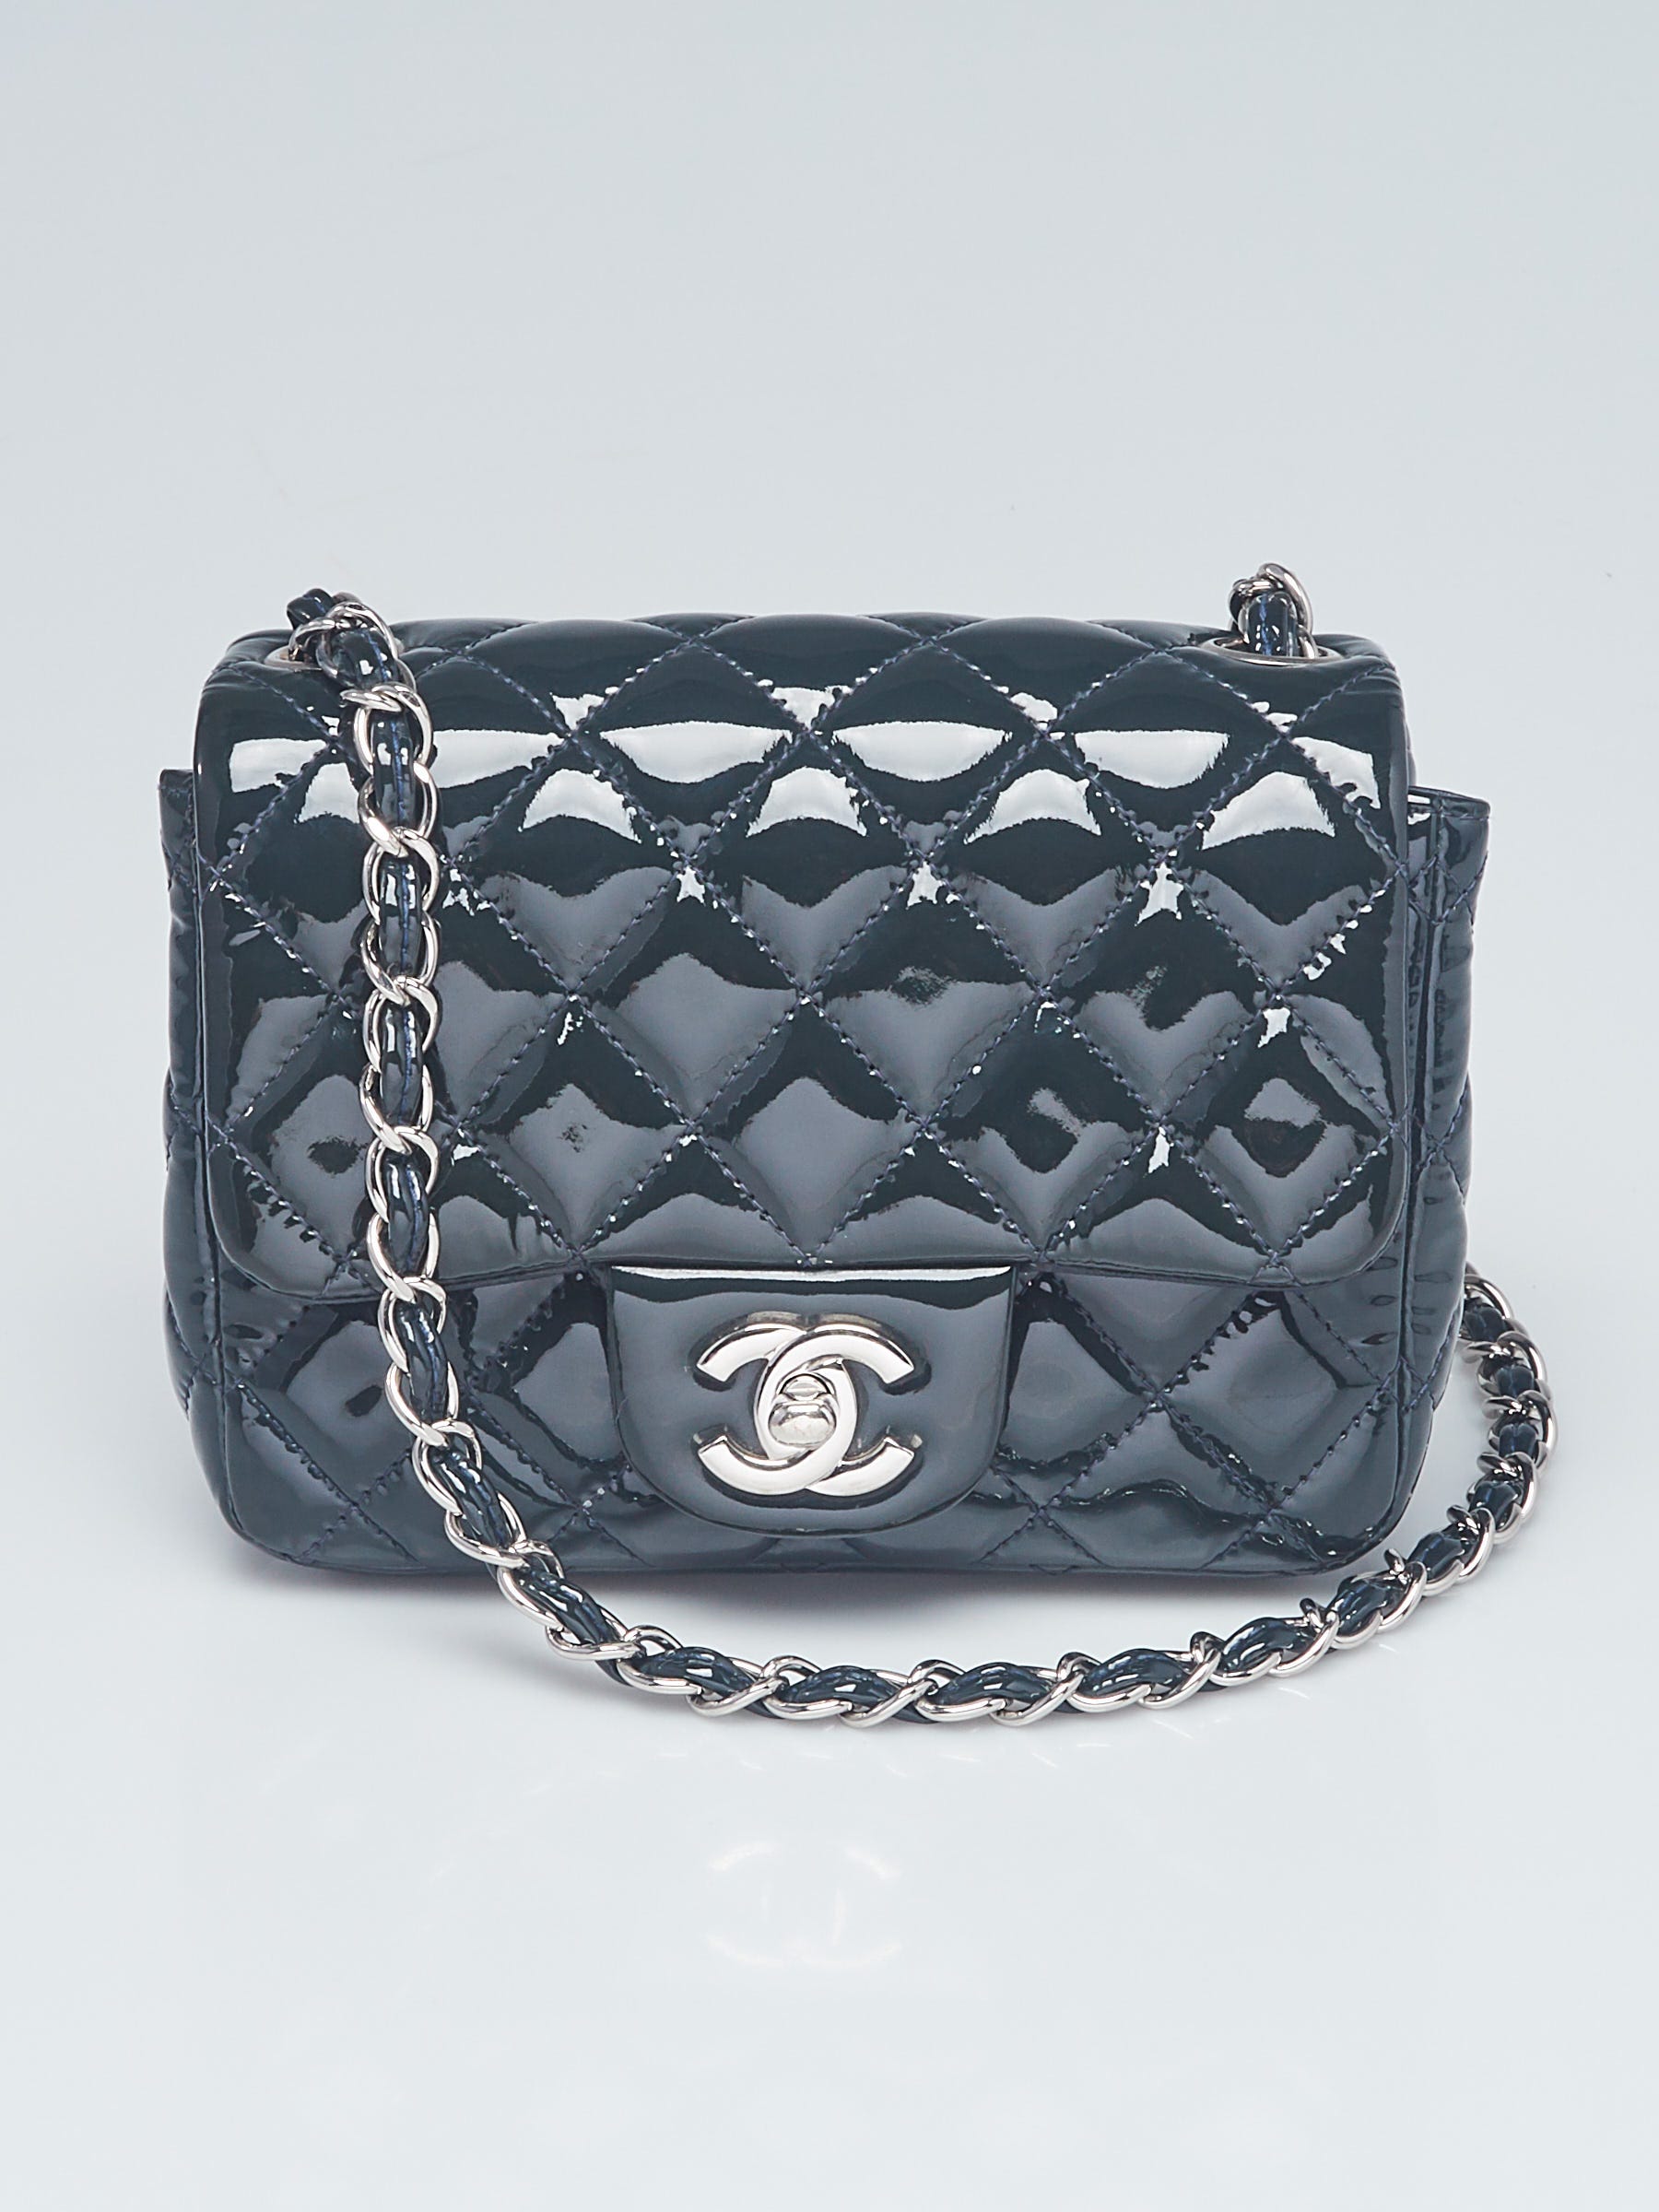 Chanel Dark Blue Quilted Patent Leather Classic Square Mini Flap